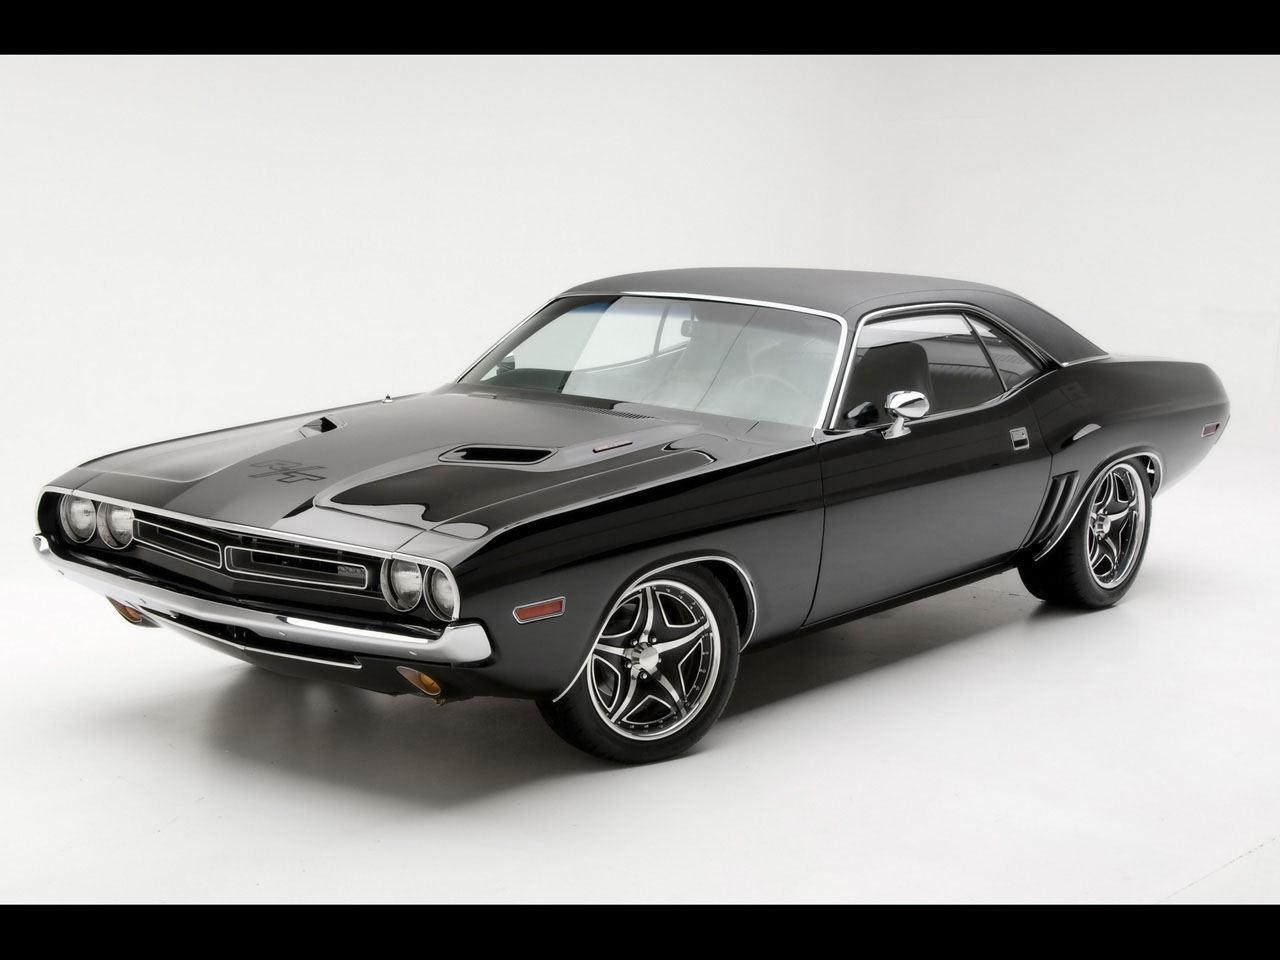 Classic Muscle Car Wallpaper Images amp Pictures   Becuo